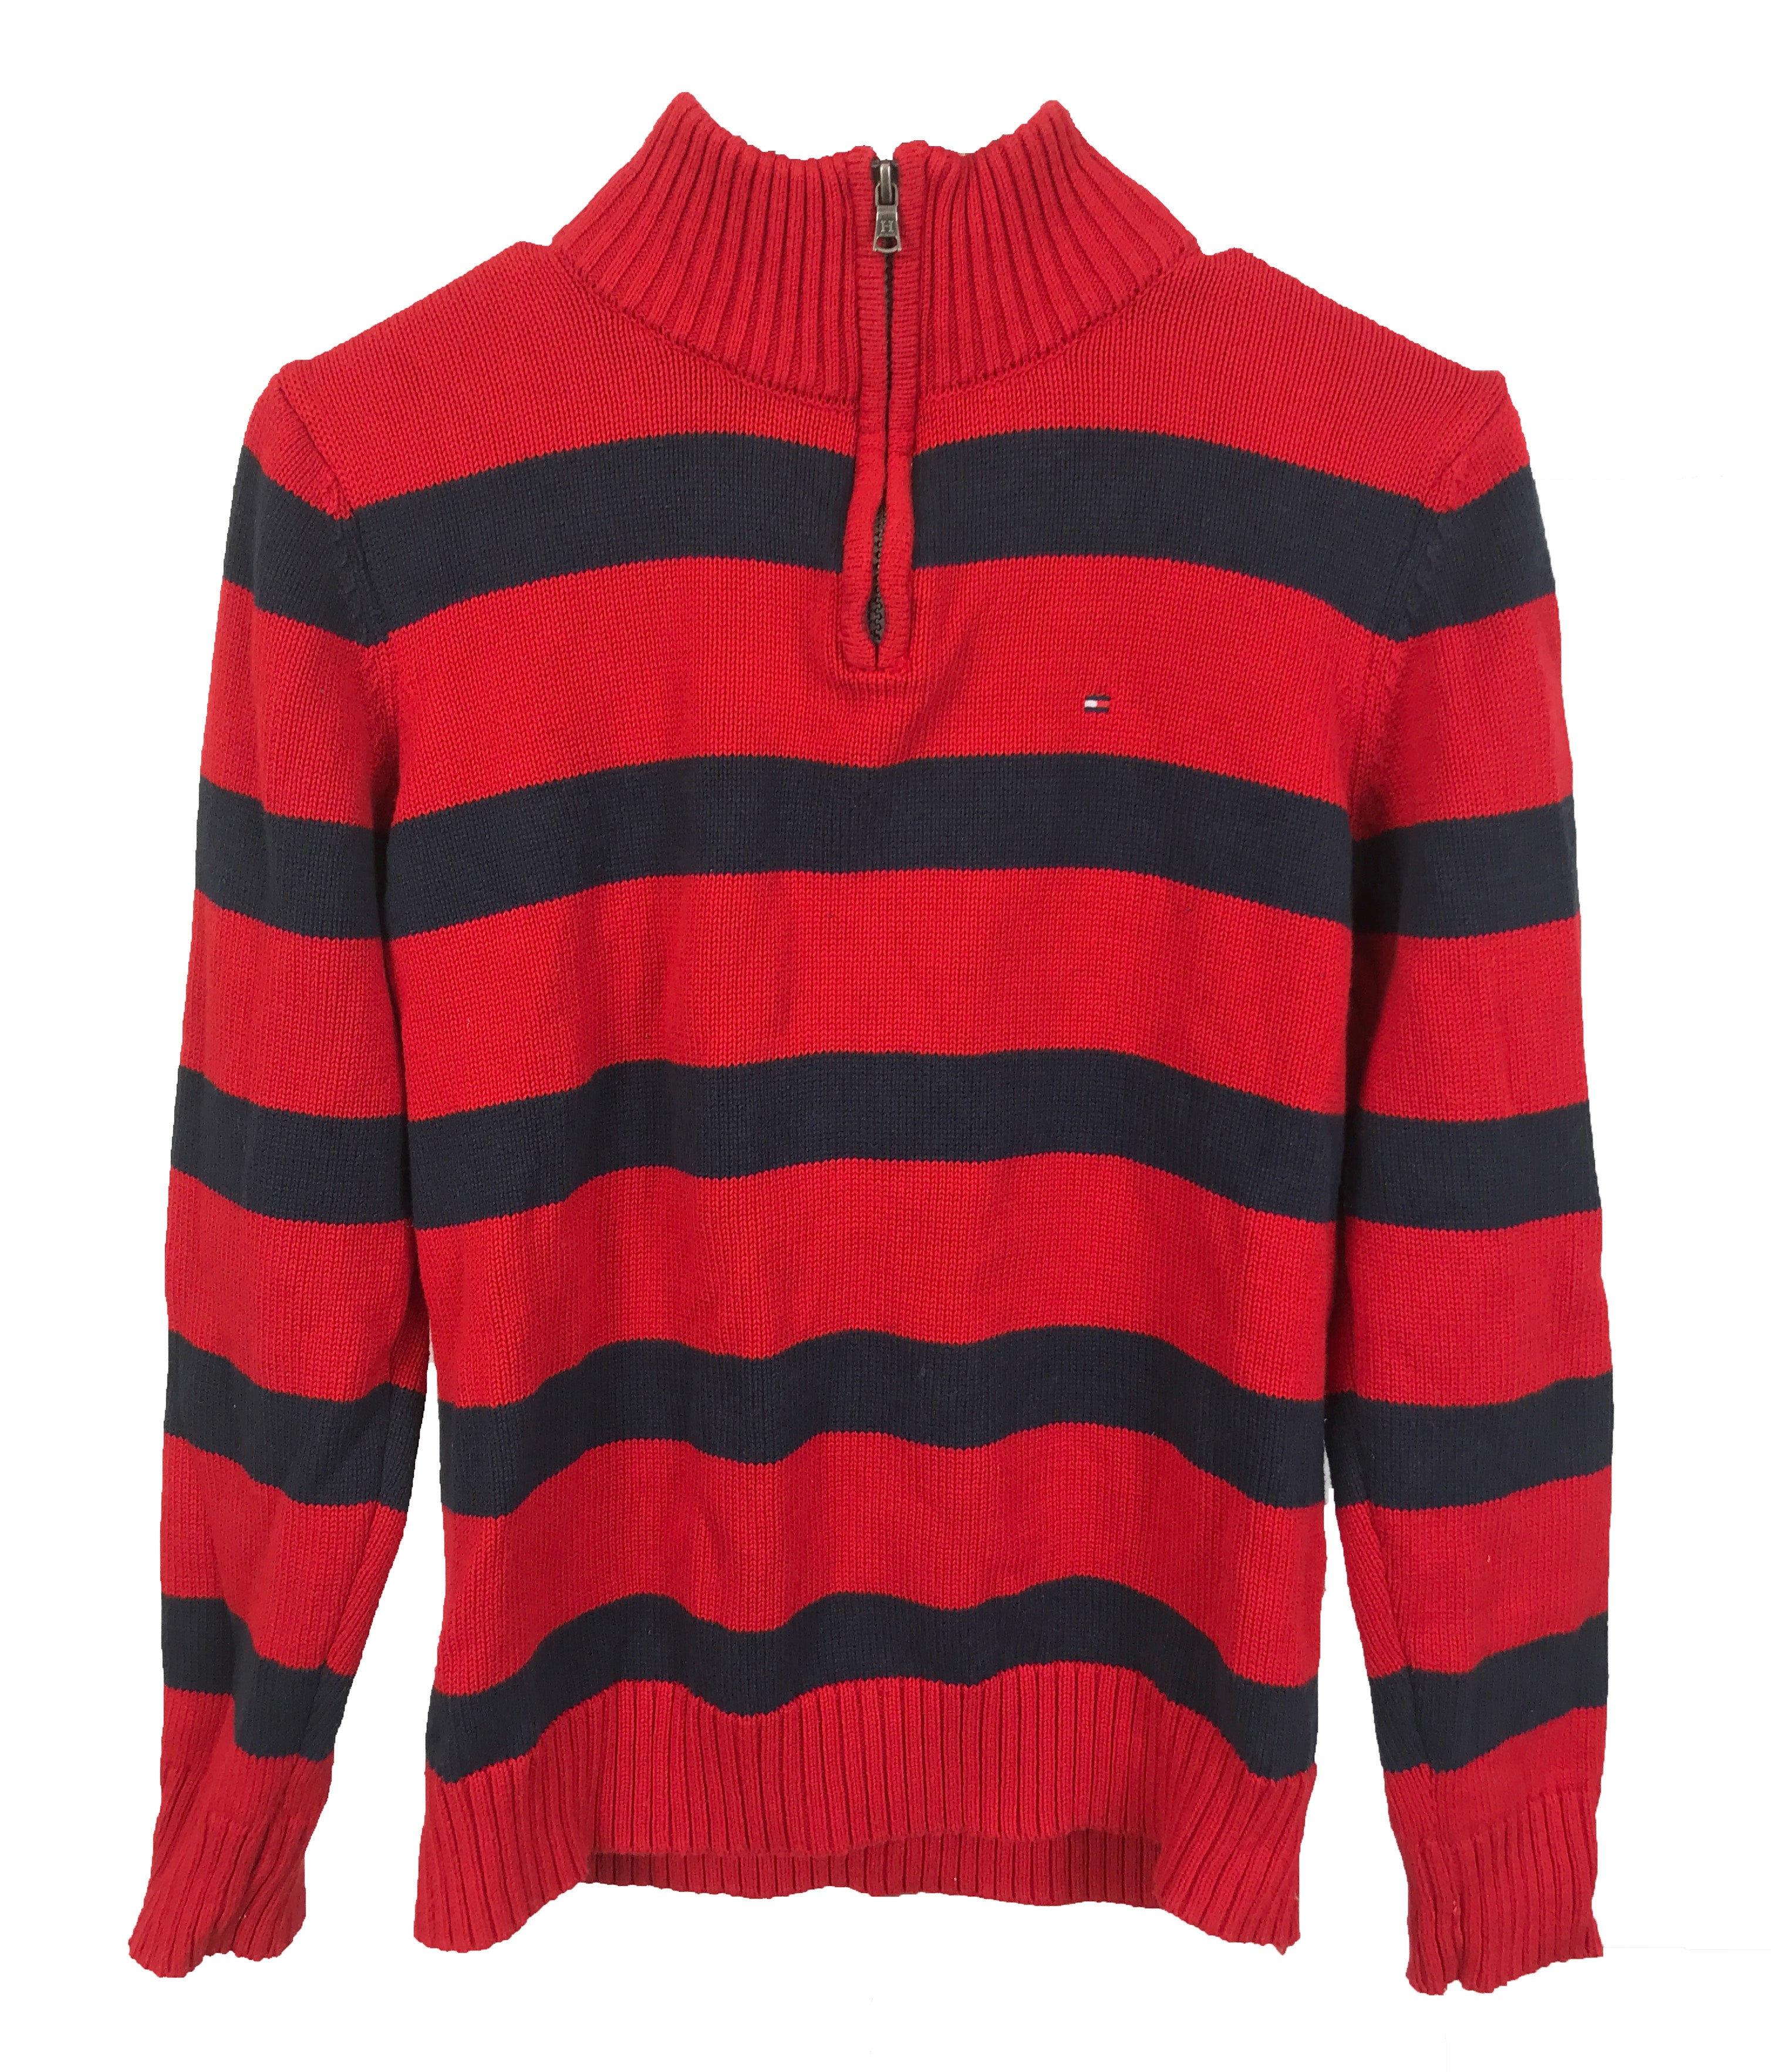 Tommy Hilfiger Red Quarter Zip Up Youth Size L